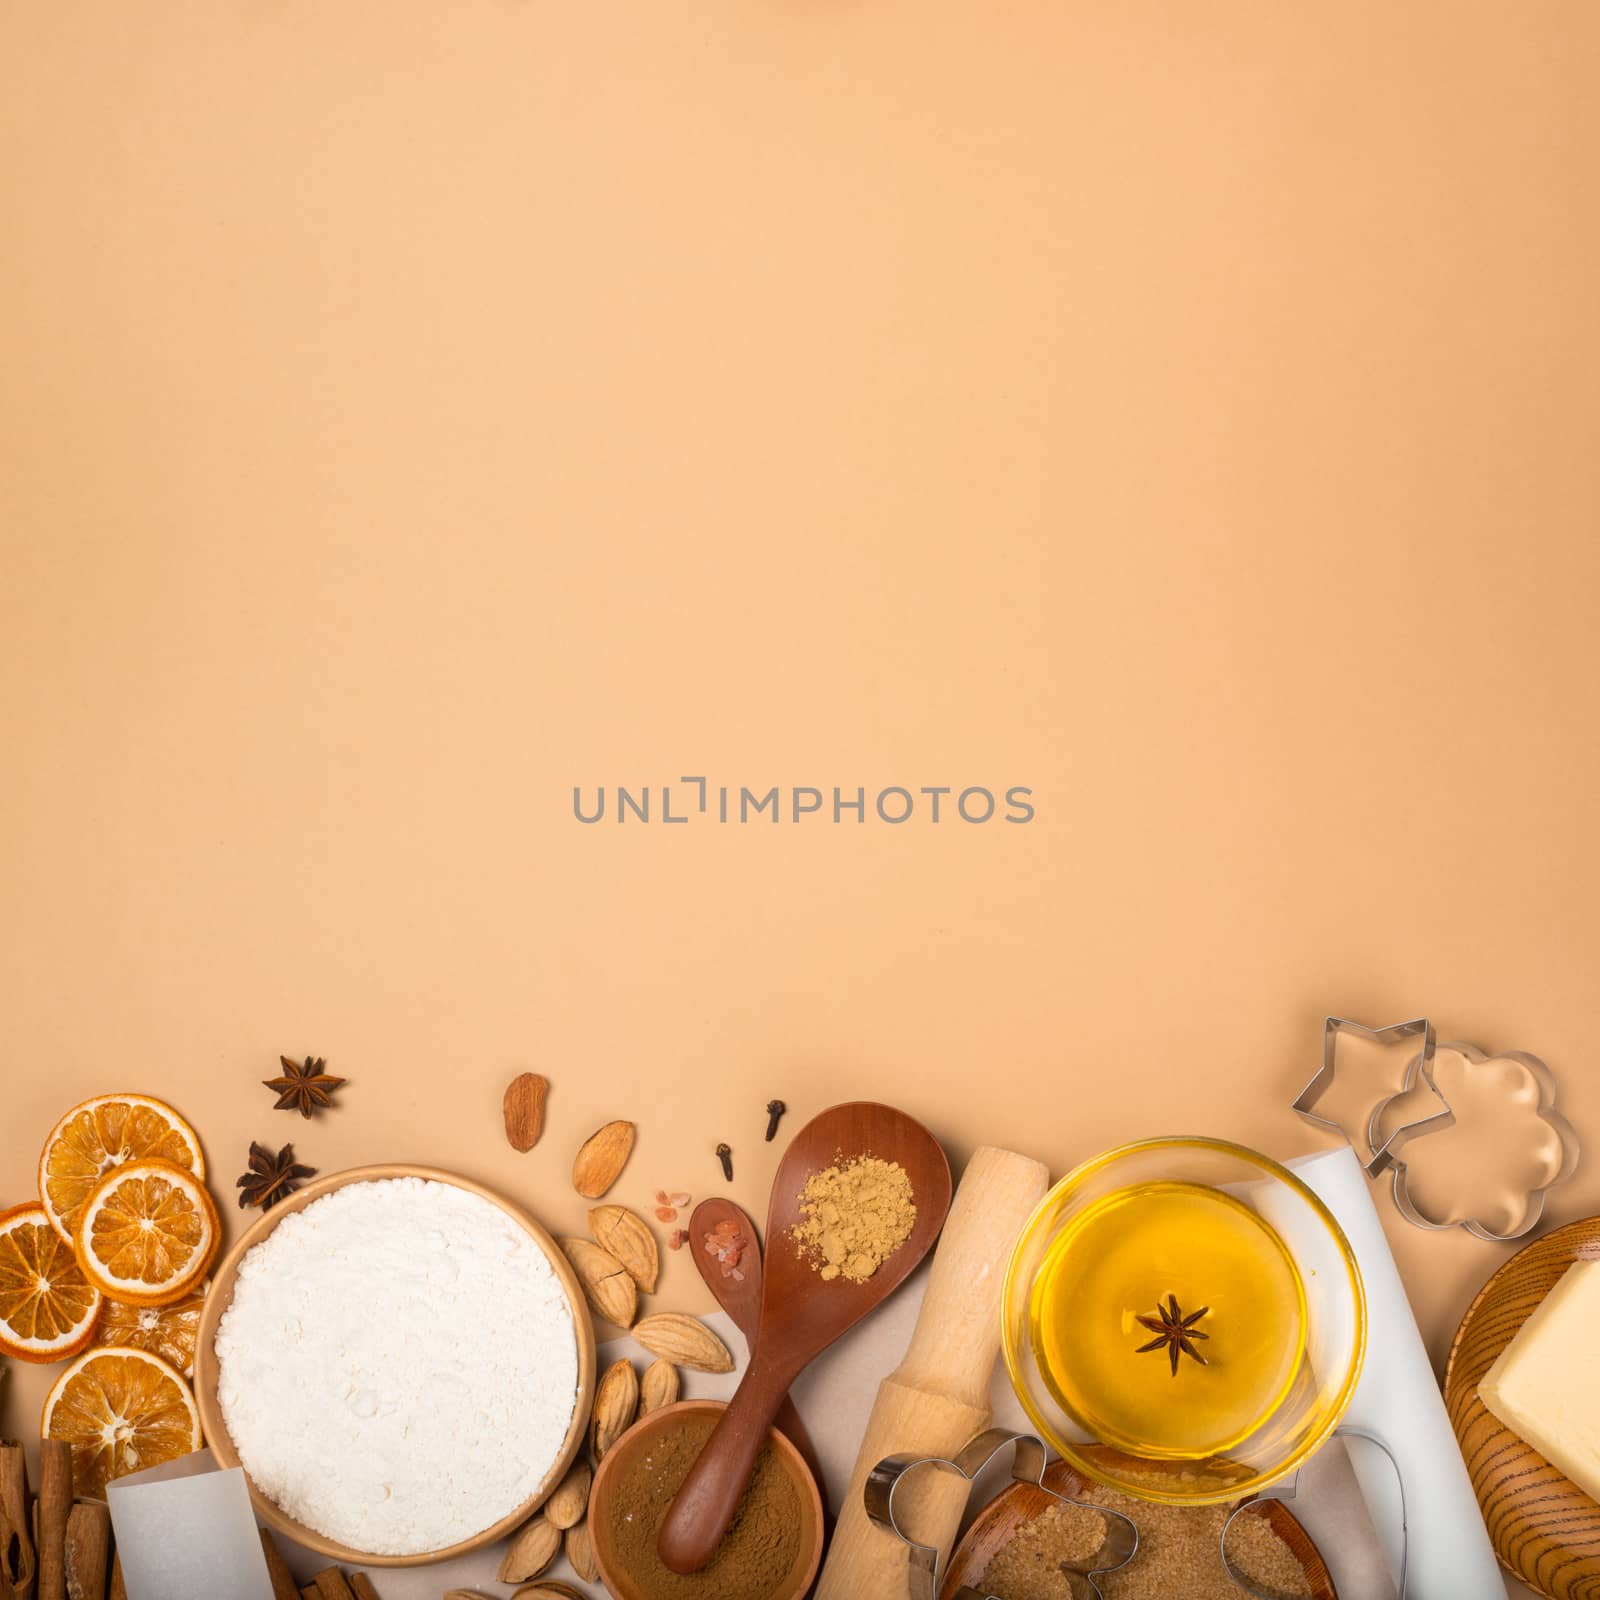 Christmas gingerbread cookies cooking background flat lay top view template with copy space for text. Baking utensils, spices and food ingredients on brown paper background